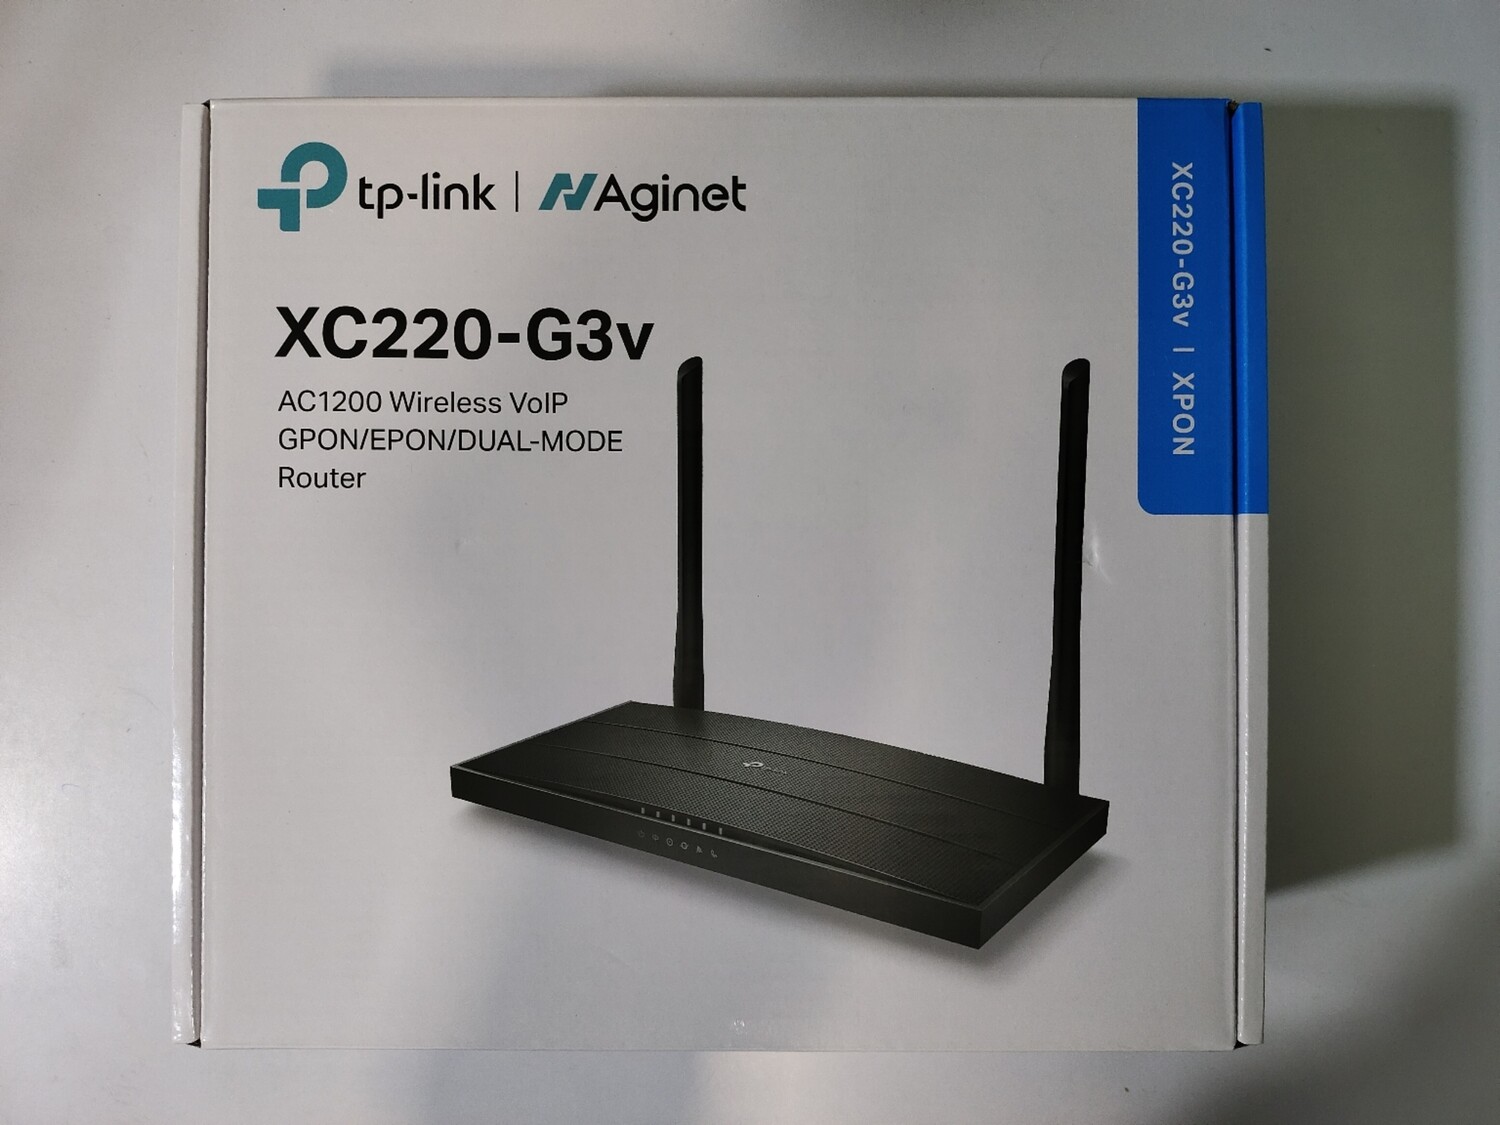 TP Link XC220-G3v AC1200 Wireless XPON Router - Rs.2550